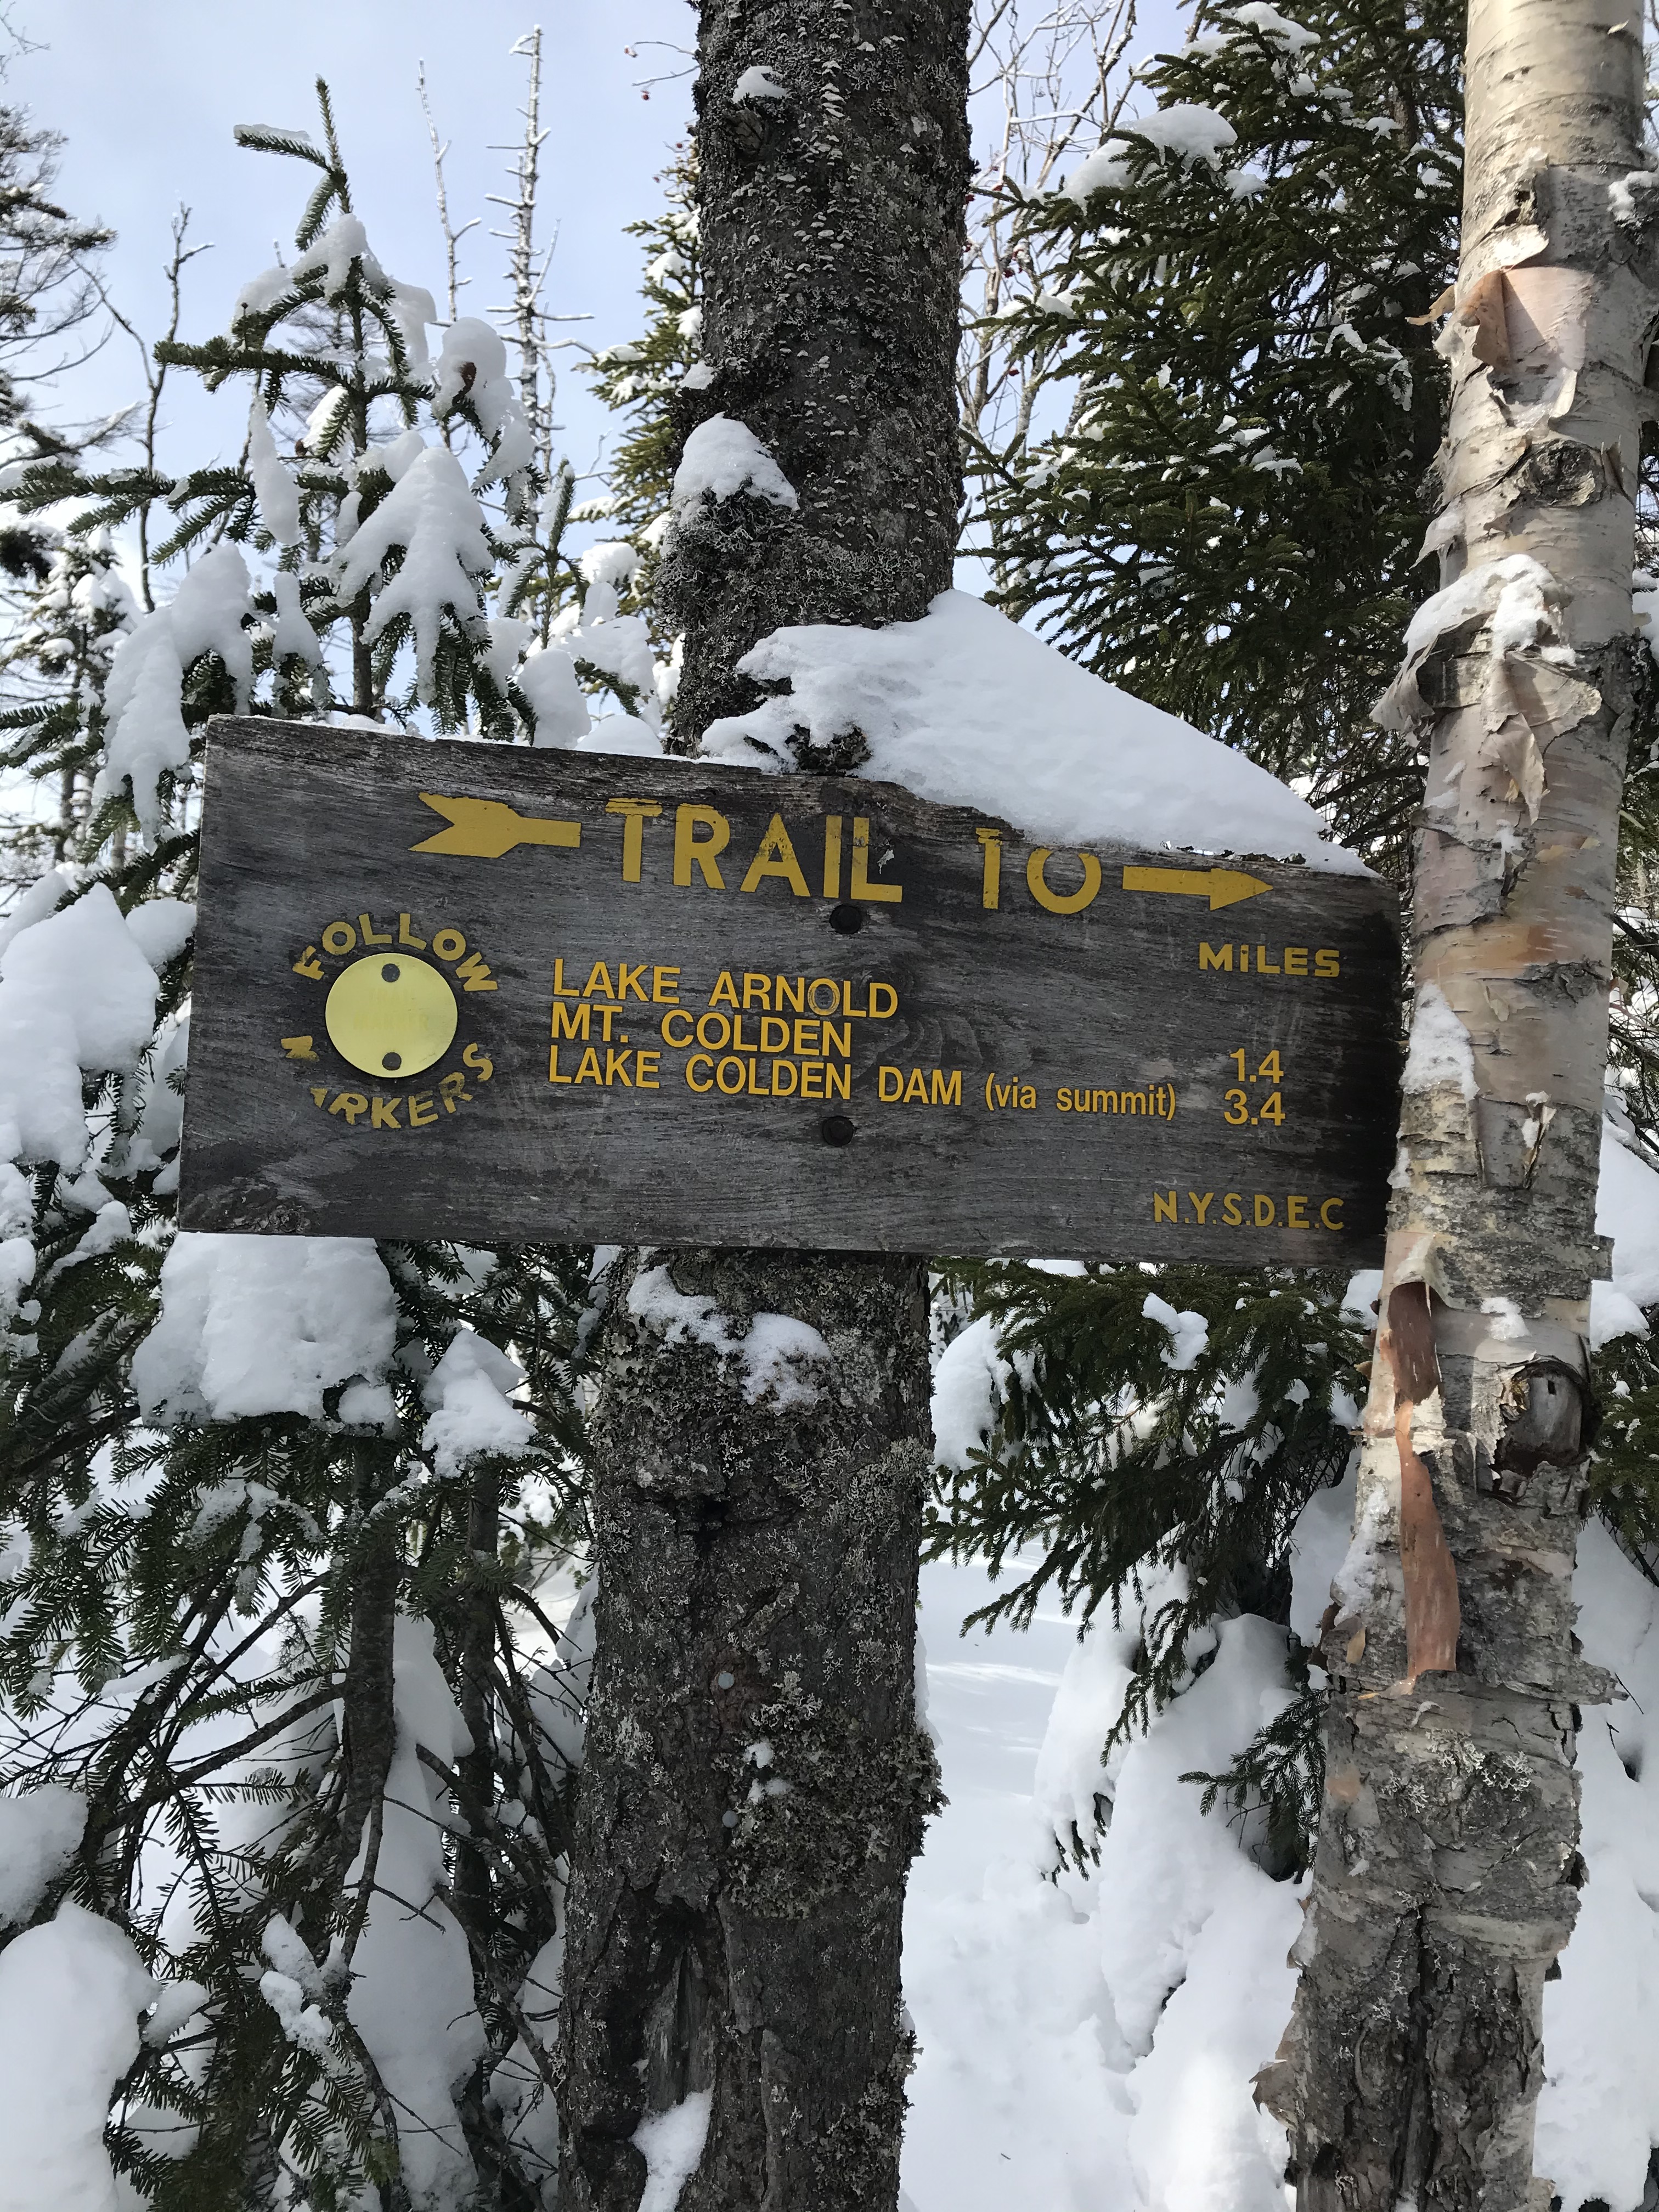 Trail sign 1.4 miles to Colden summit